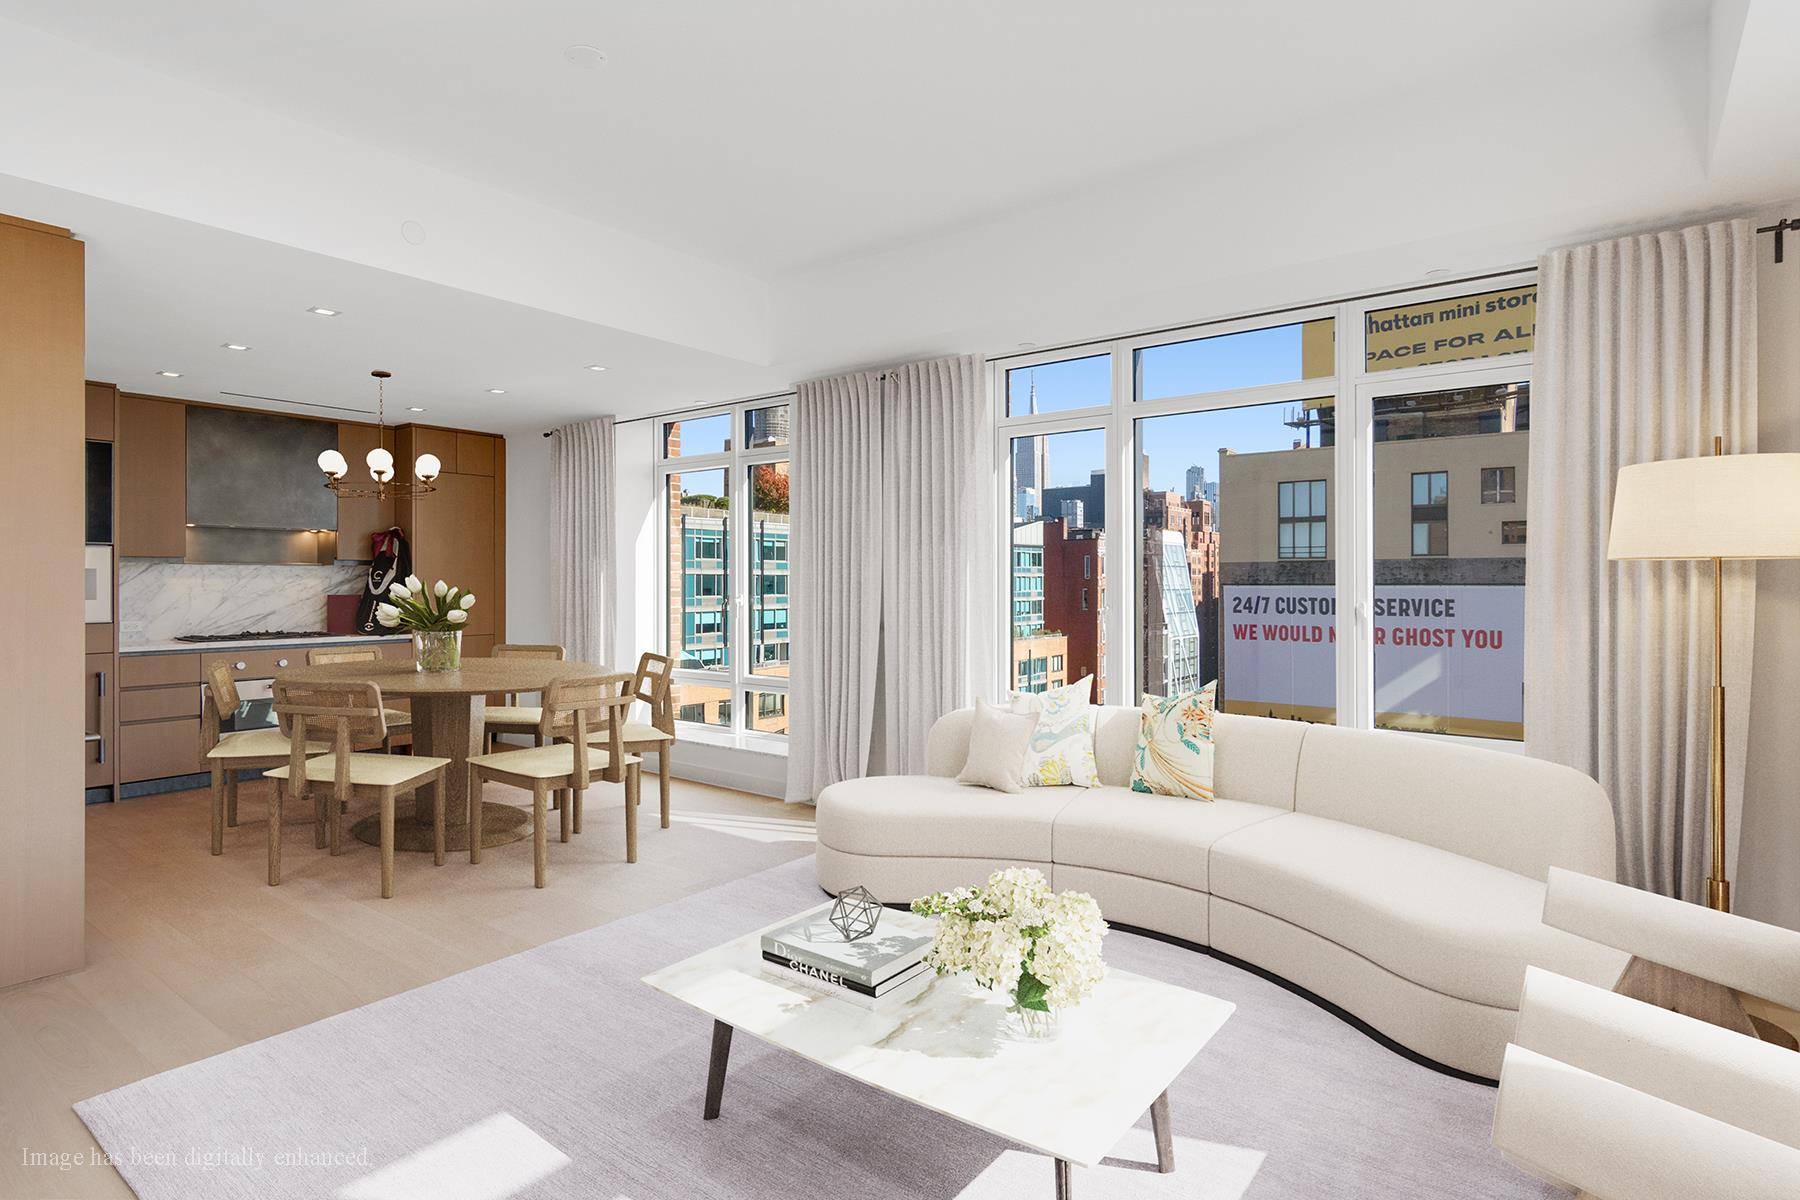 First time on the market Luxury Rental Residence 14DEWonderful opportunity to live in a brand new, full service, luxurious condominium, The Cortland, designed by renowned architectural icons Robert A.